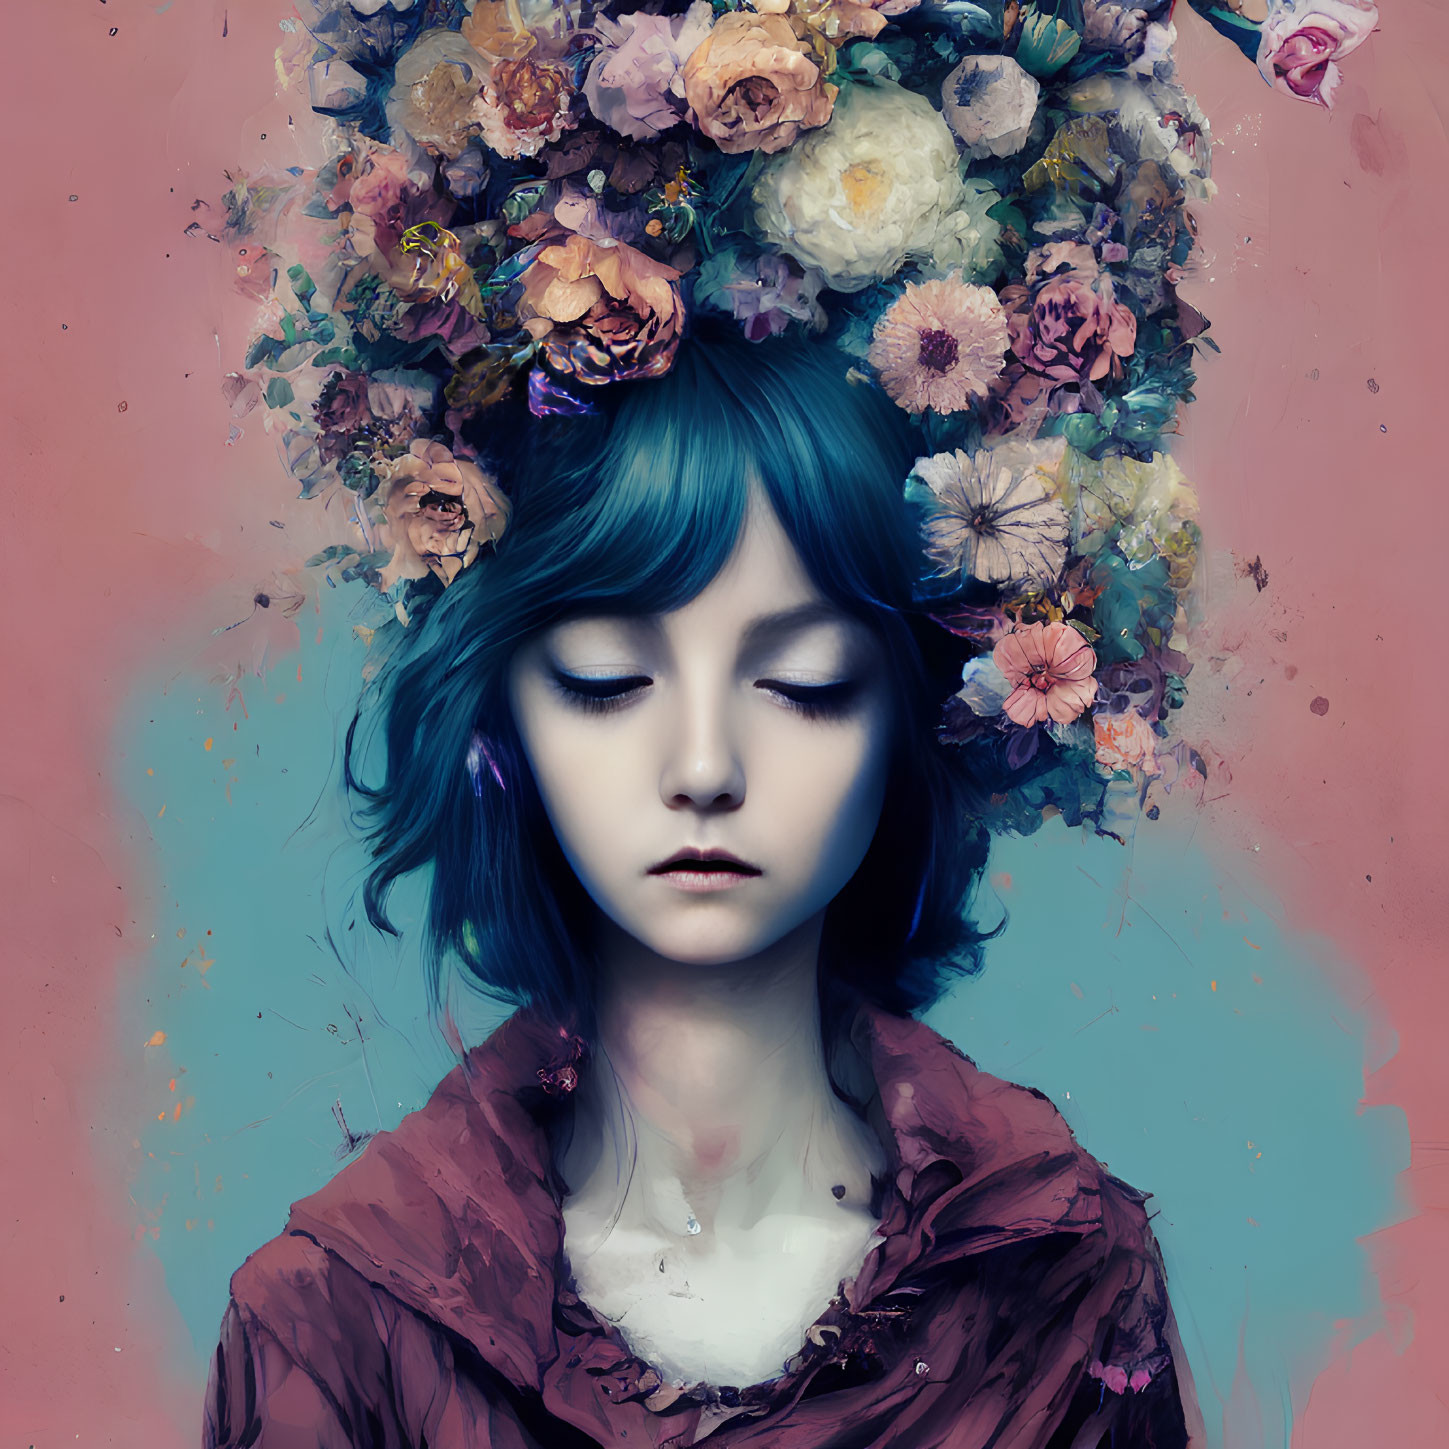 Portrait of a girl with blue hair and closed eyes, wearing a floral crown on pink and blue background